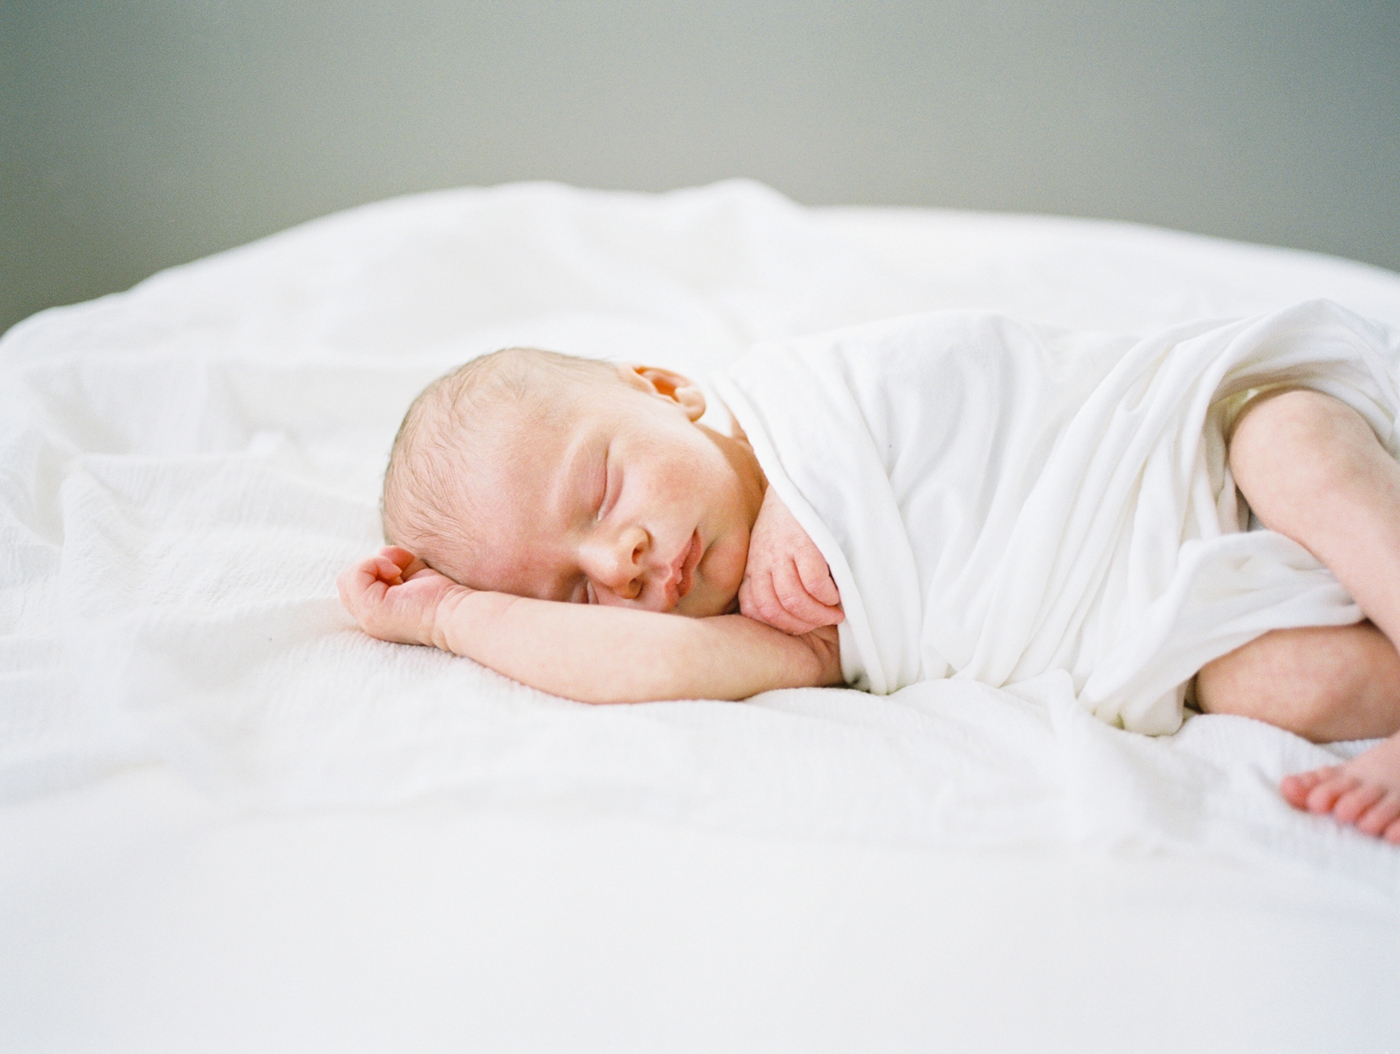 Film image of baby sleeping in white swaddle during in-home lifestyle newborn session in Asheville, NC. Photo by Lauren Sosler Photography.